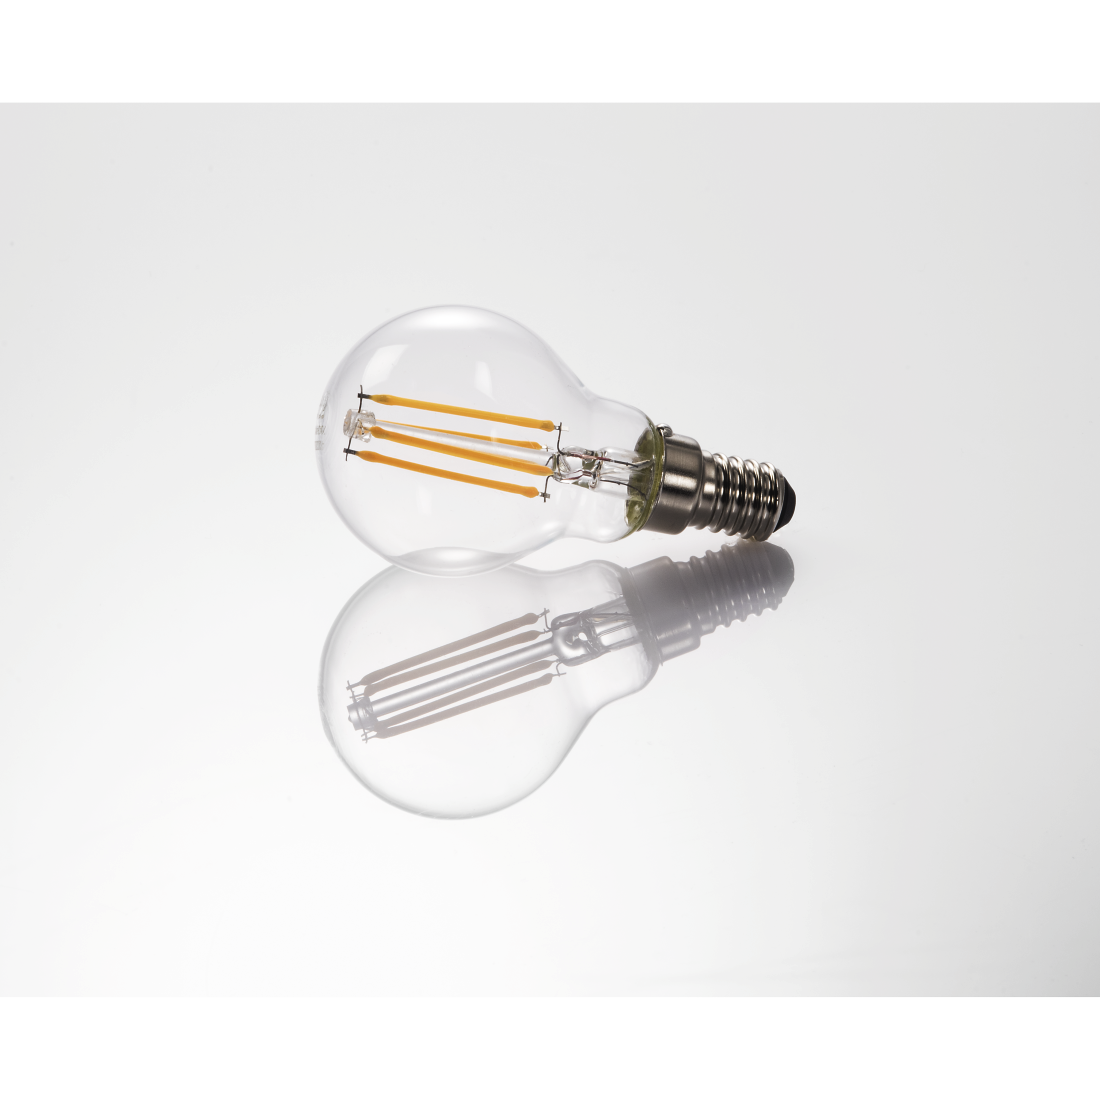 abx3 High-Res Image 3 - Xavax, LED Filament, E14, 470 lm Replaces 40W, Drop Bulb, warm white